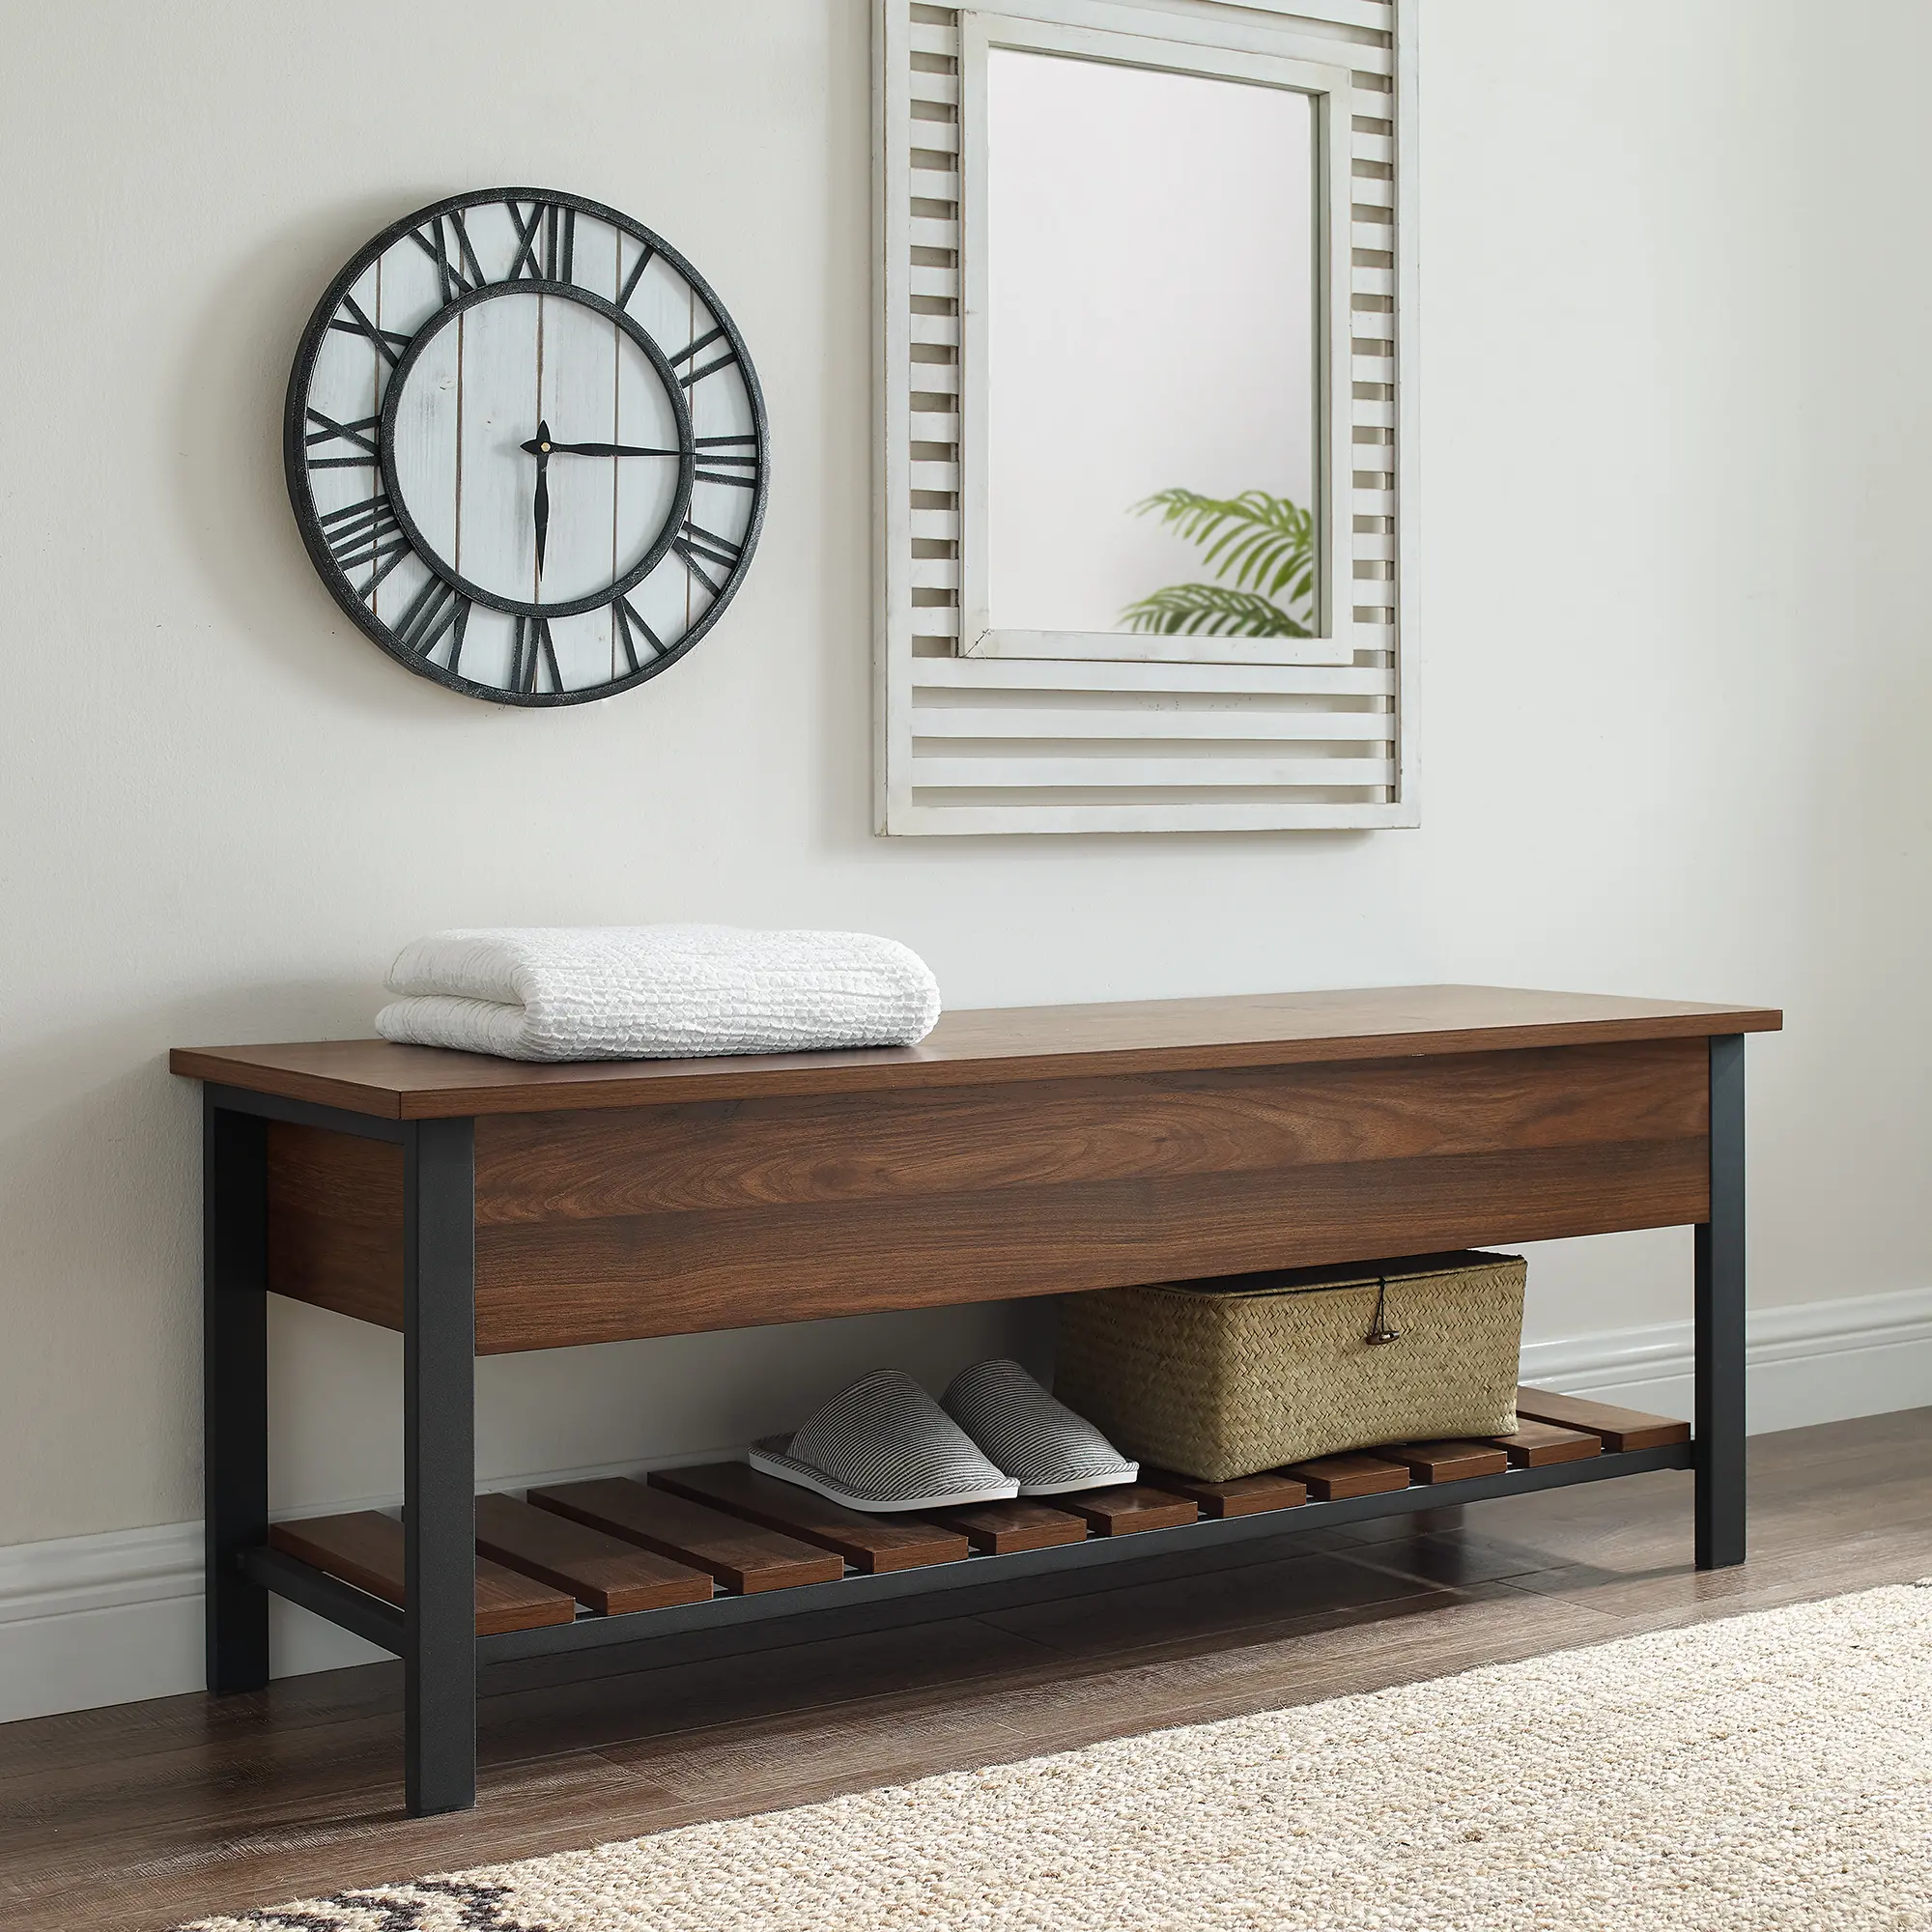 CO-Z Lift-Top Entryway Shoe Storage Bench with Shelf - On Sale